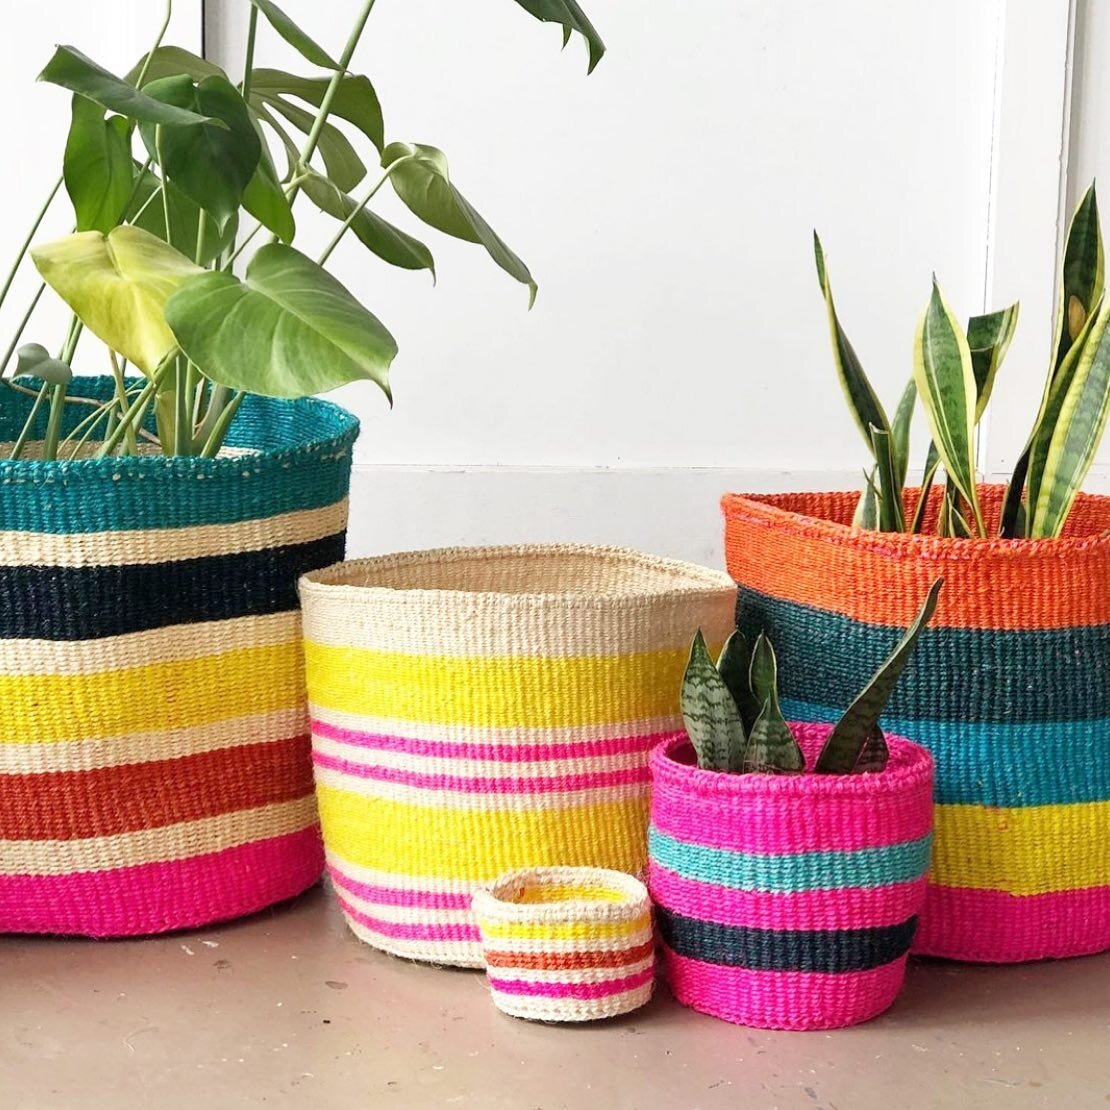 Shop all the bright spring colors 🔻🔹🔸 this Sunday including @amshastudio&rsquo;s very cute baskets 🧺 which act as the perfect FL-EASTER!